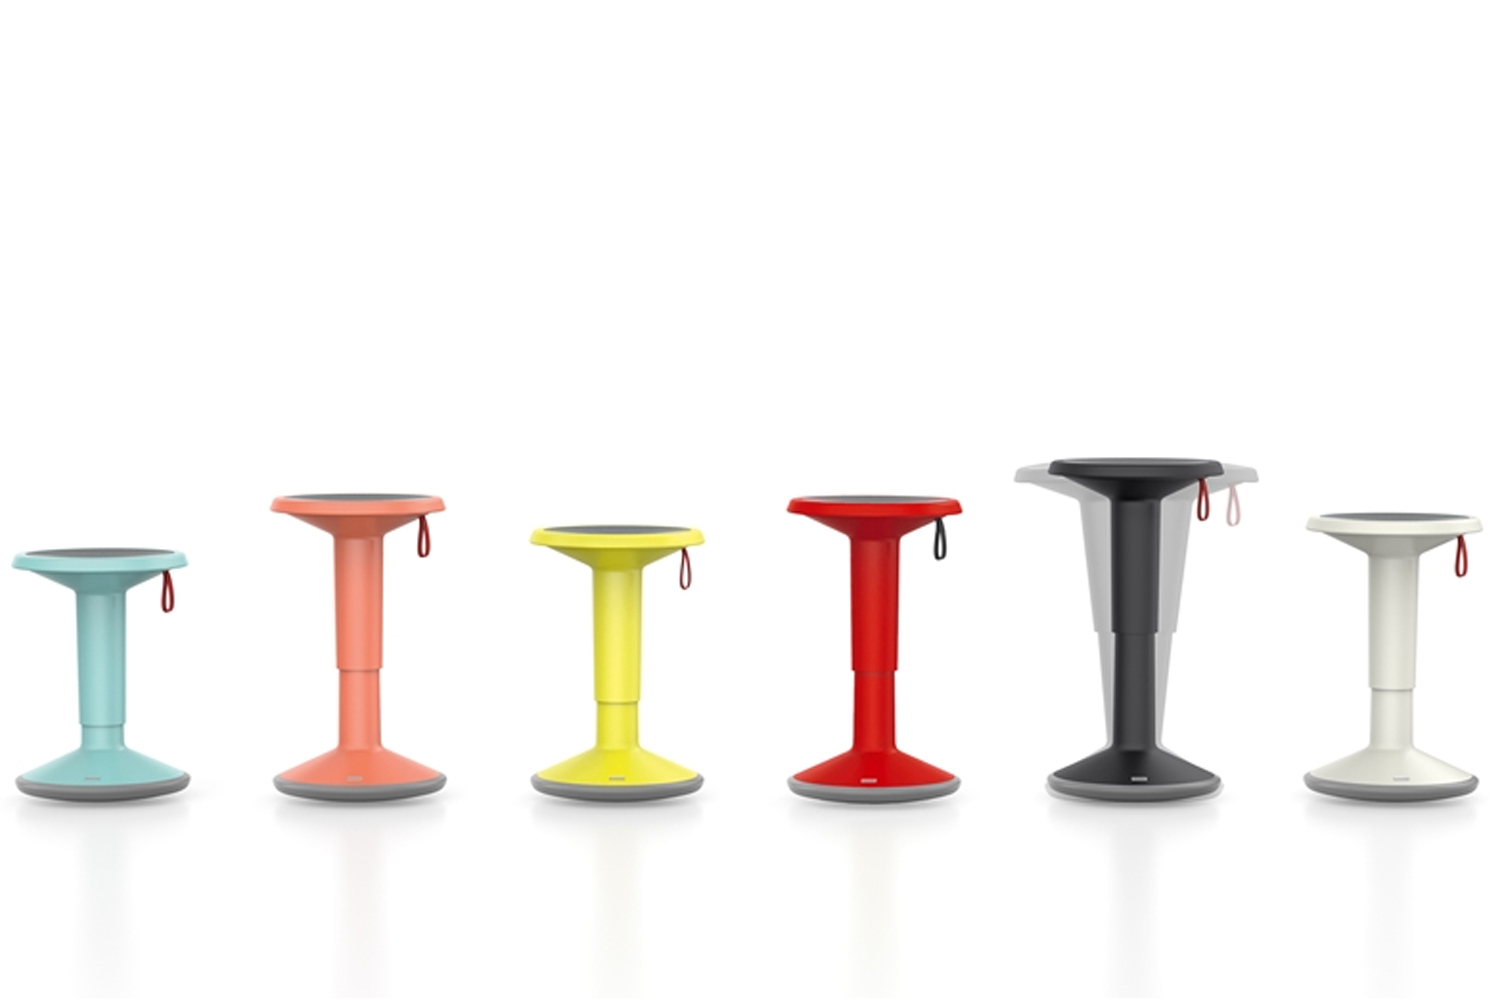 Introducing the Up stool by Fluid Concepts 